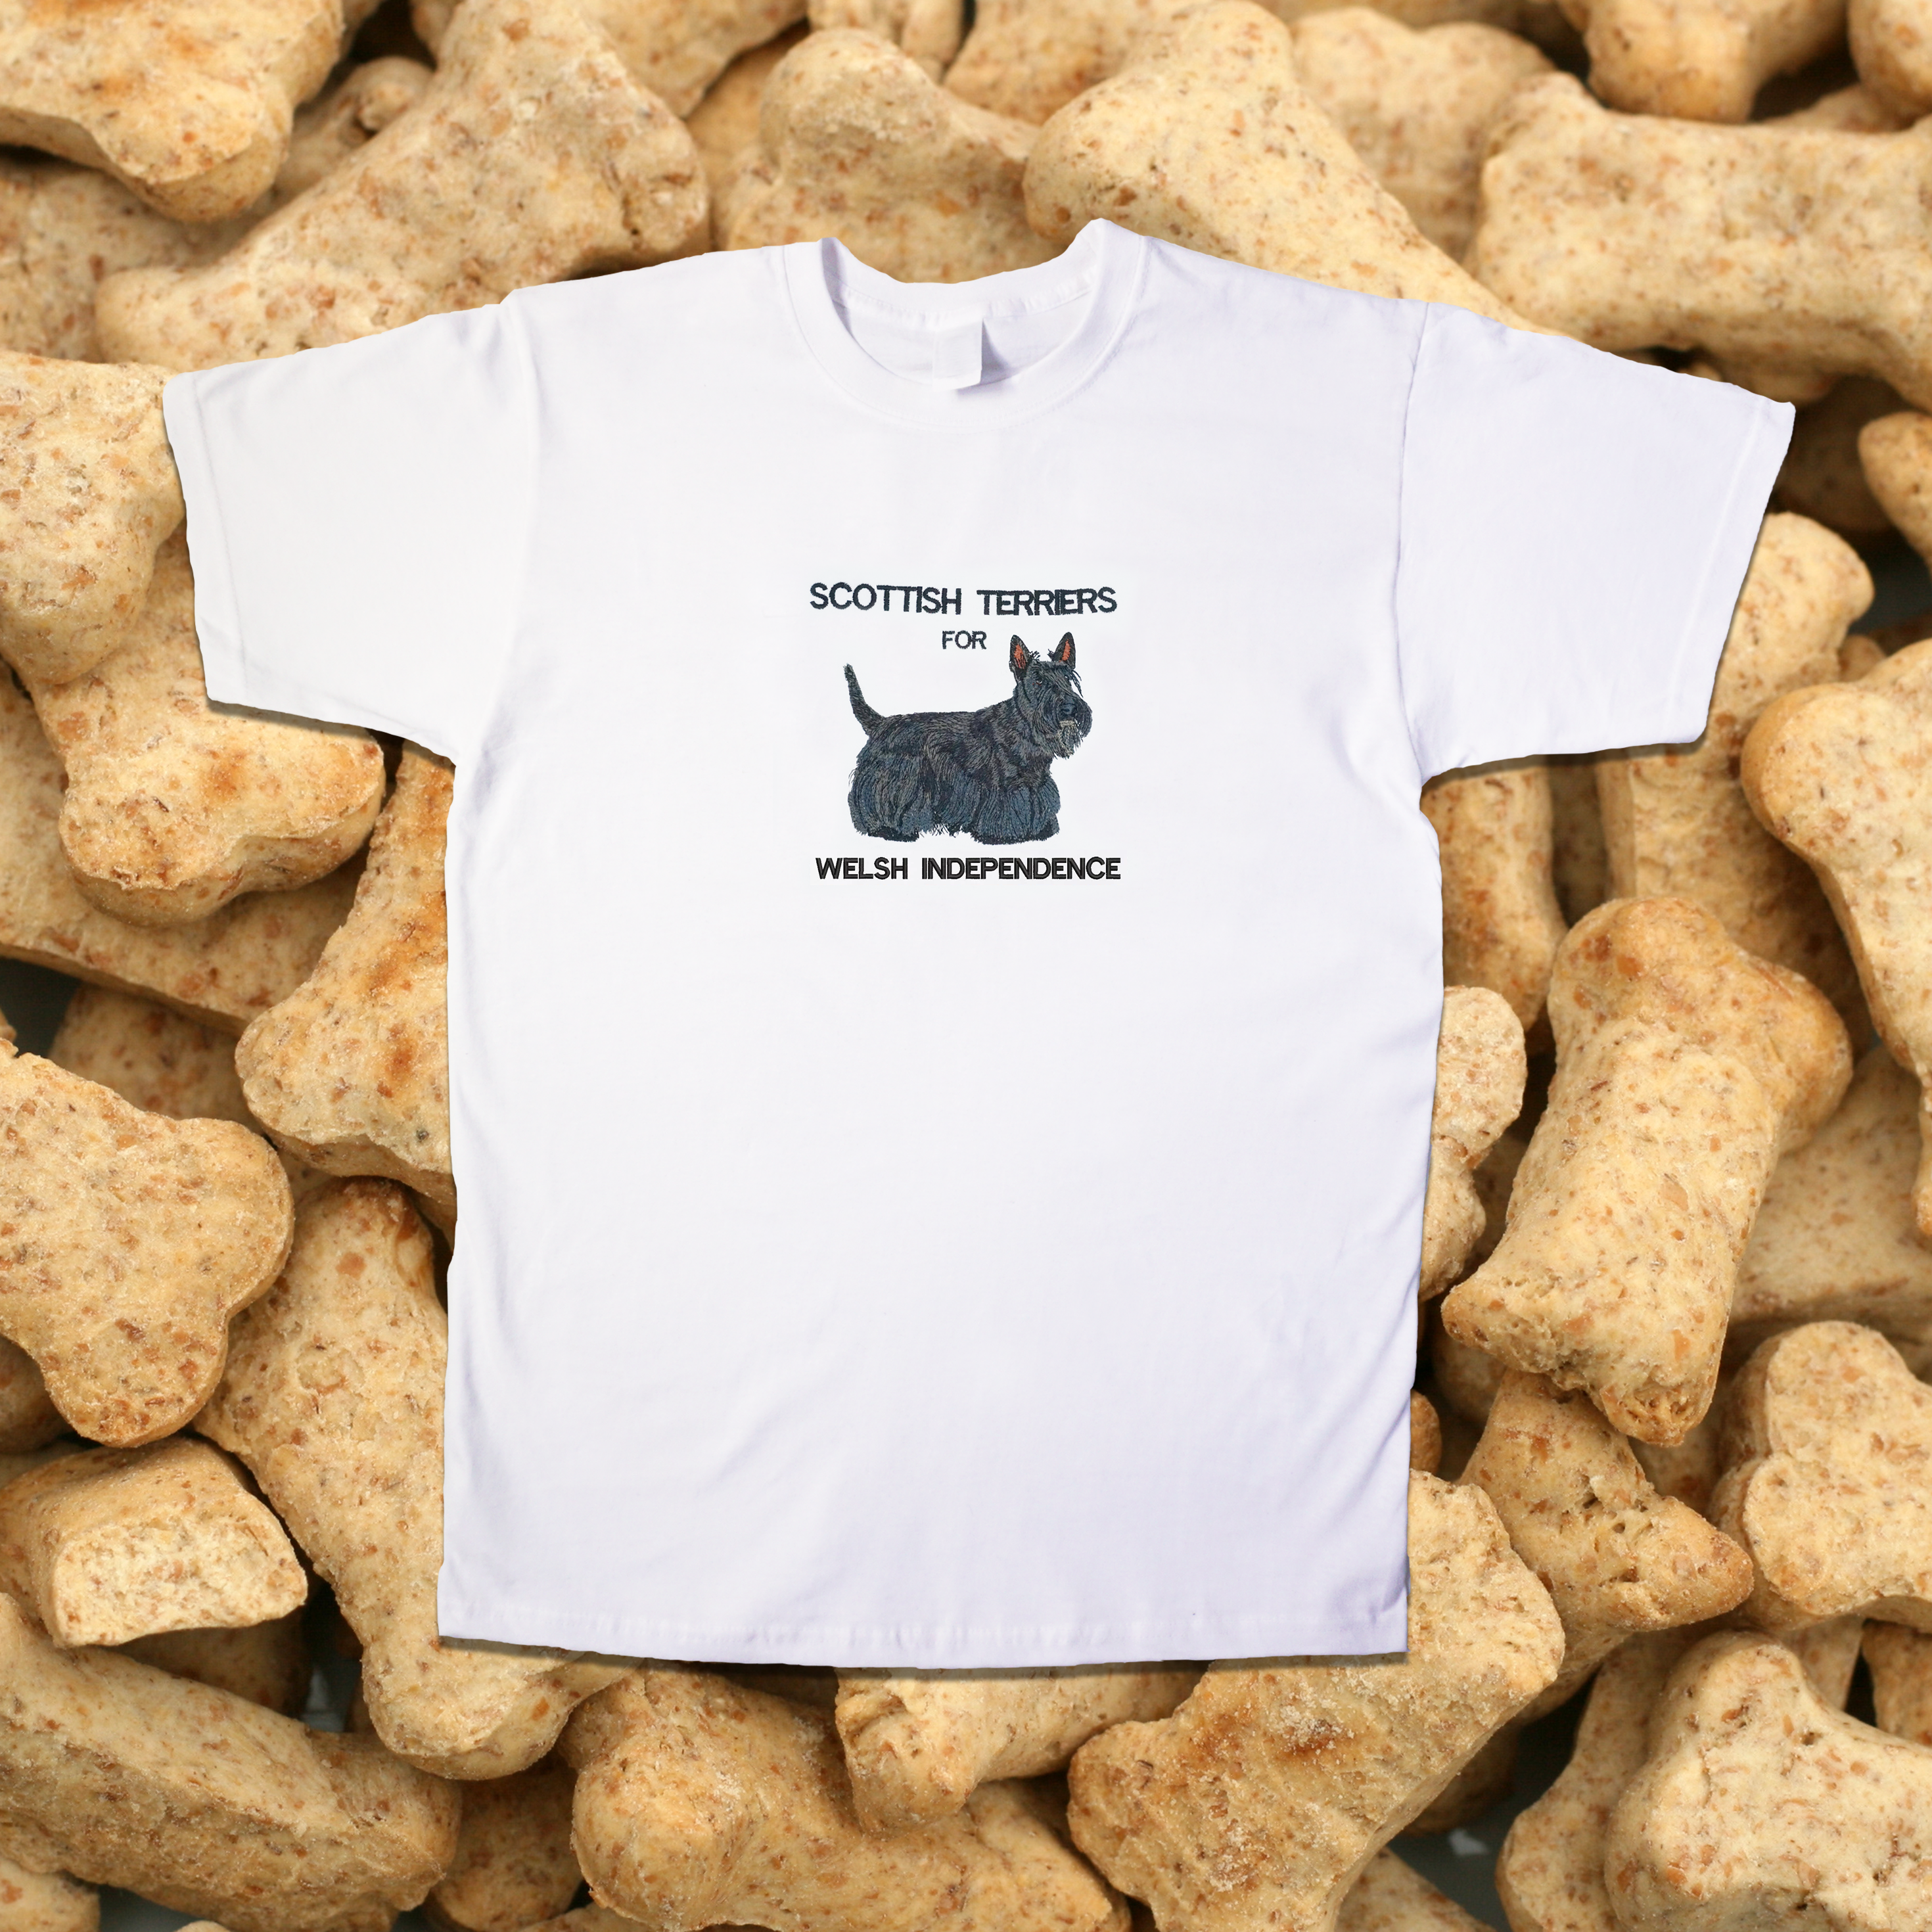 SCOTTISH TERRIERS FOR WELSH INDEPENDENCE T-SHIRT